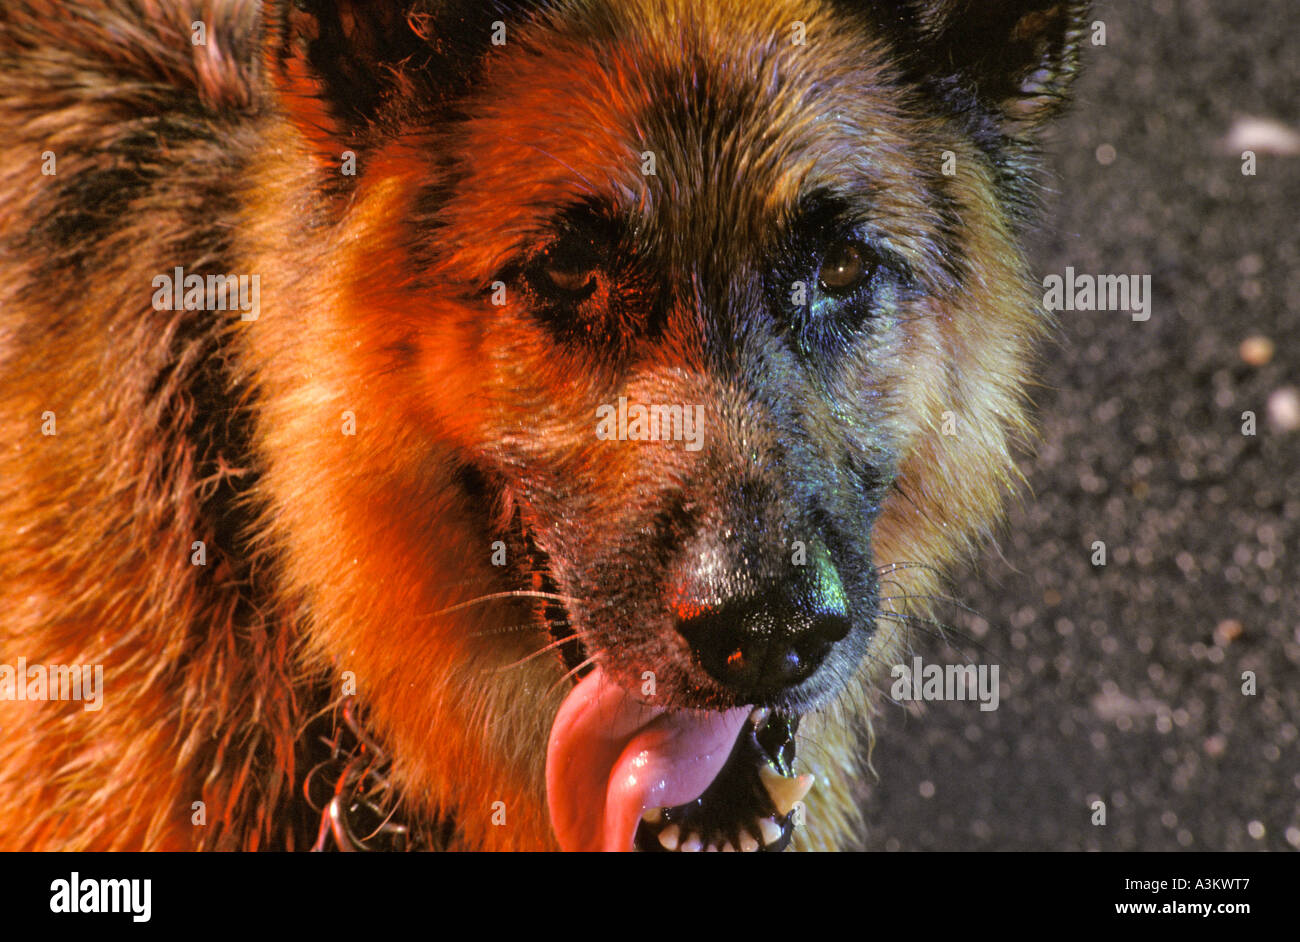 German Shepherd dog snarling and growling in mad frenzy, possibly with rabies Stock Photo